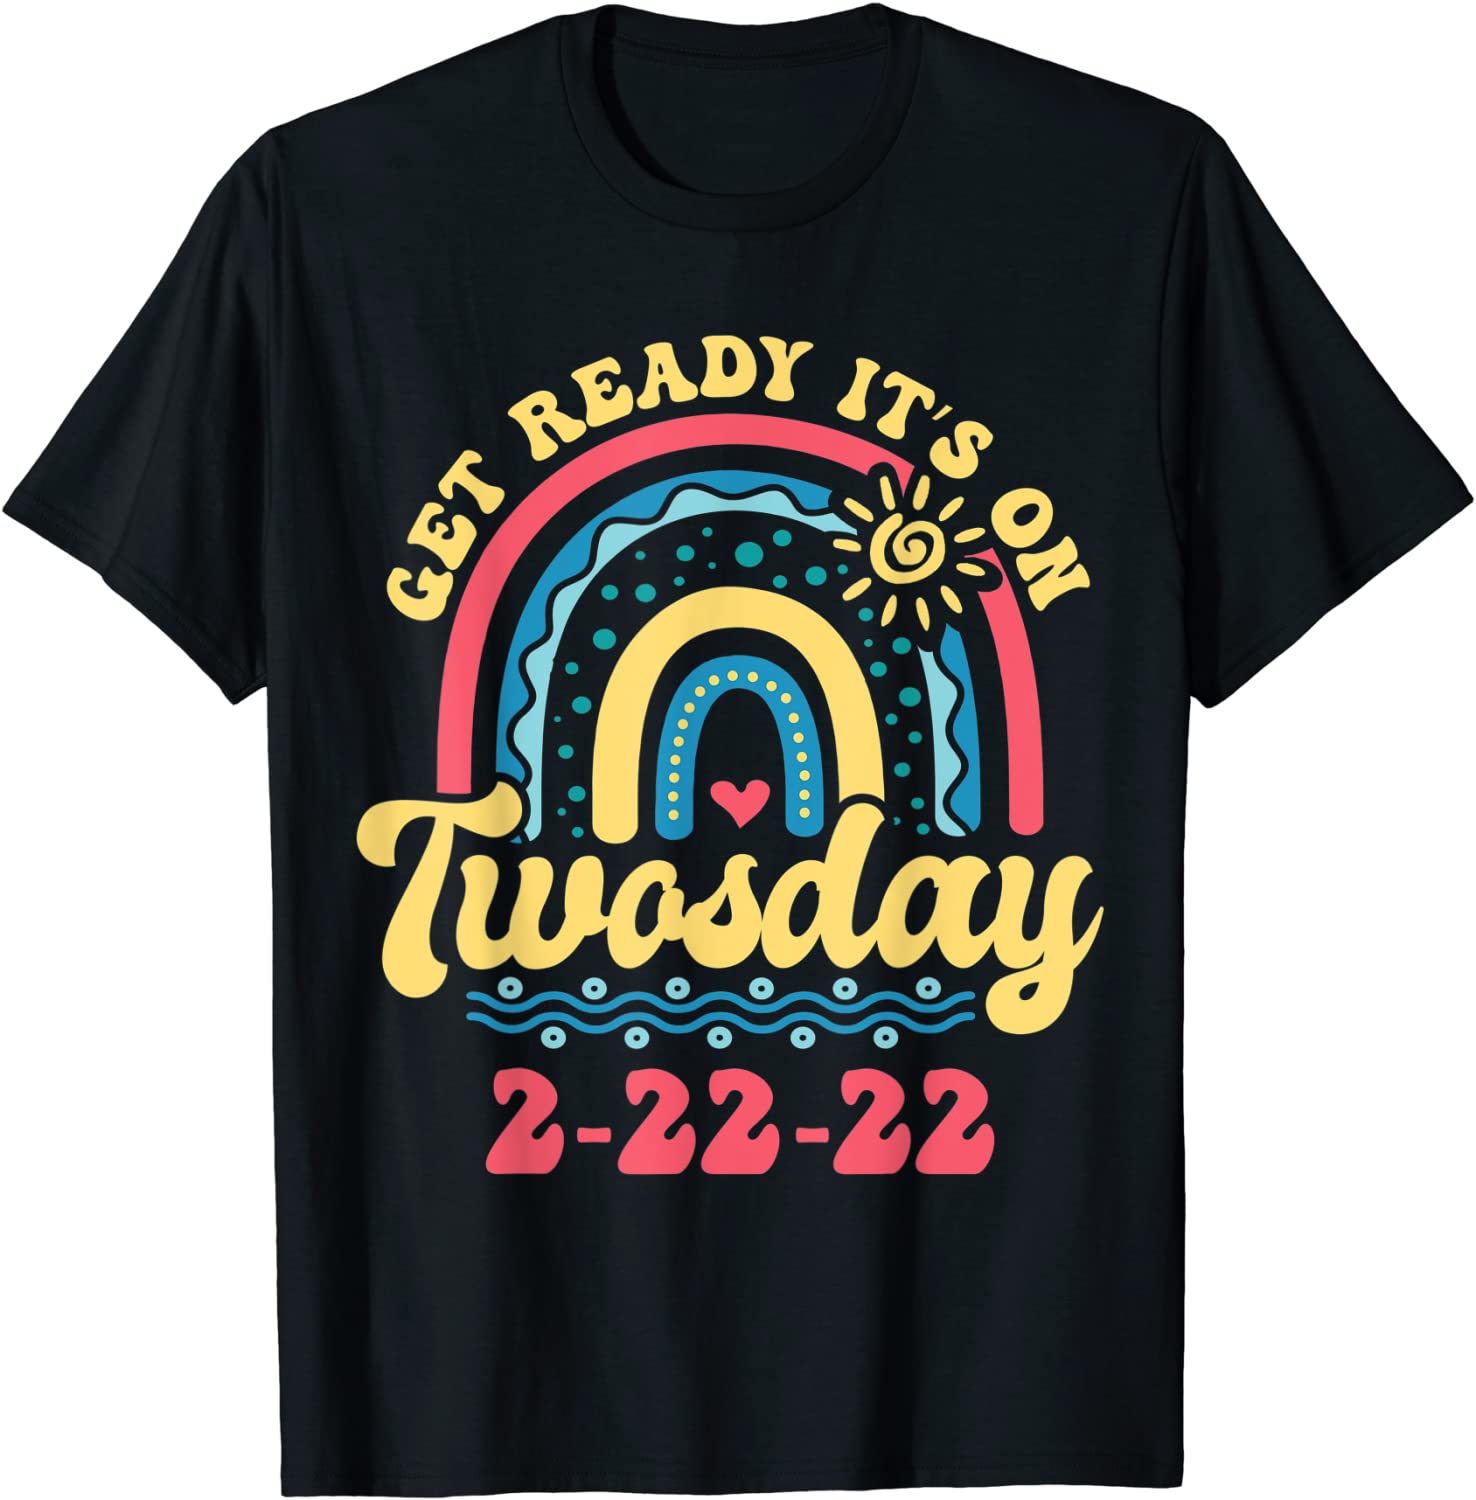 Get Ready It's On Twosday 2-22-22 February 2nd 2022 Tee Shirt ...